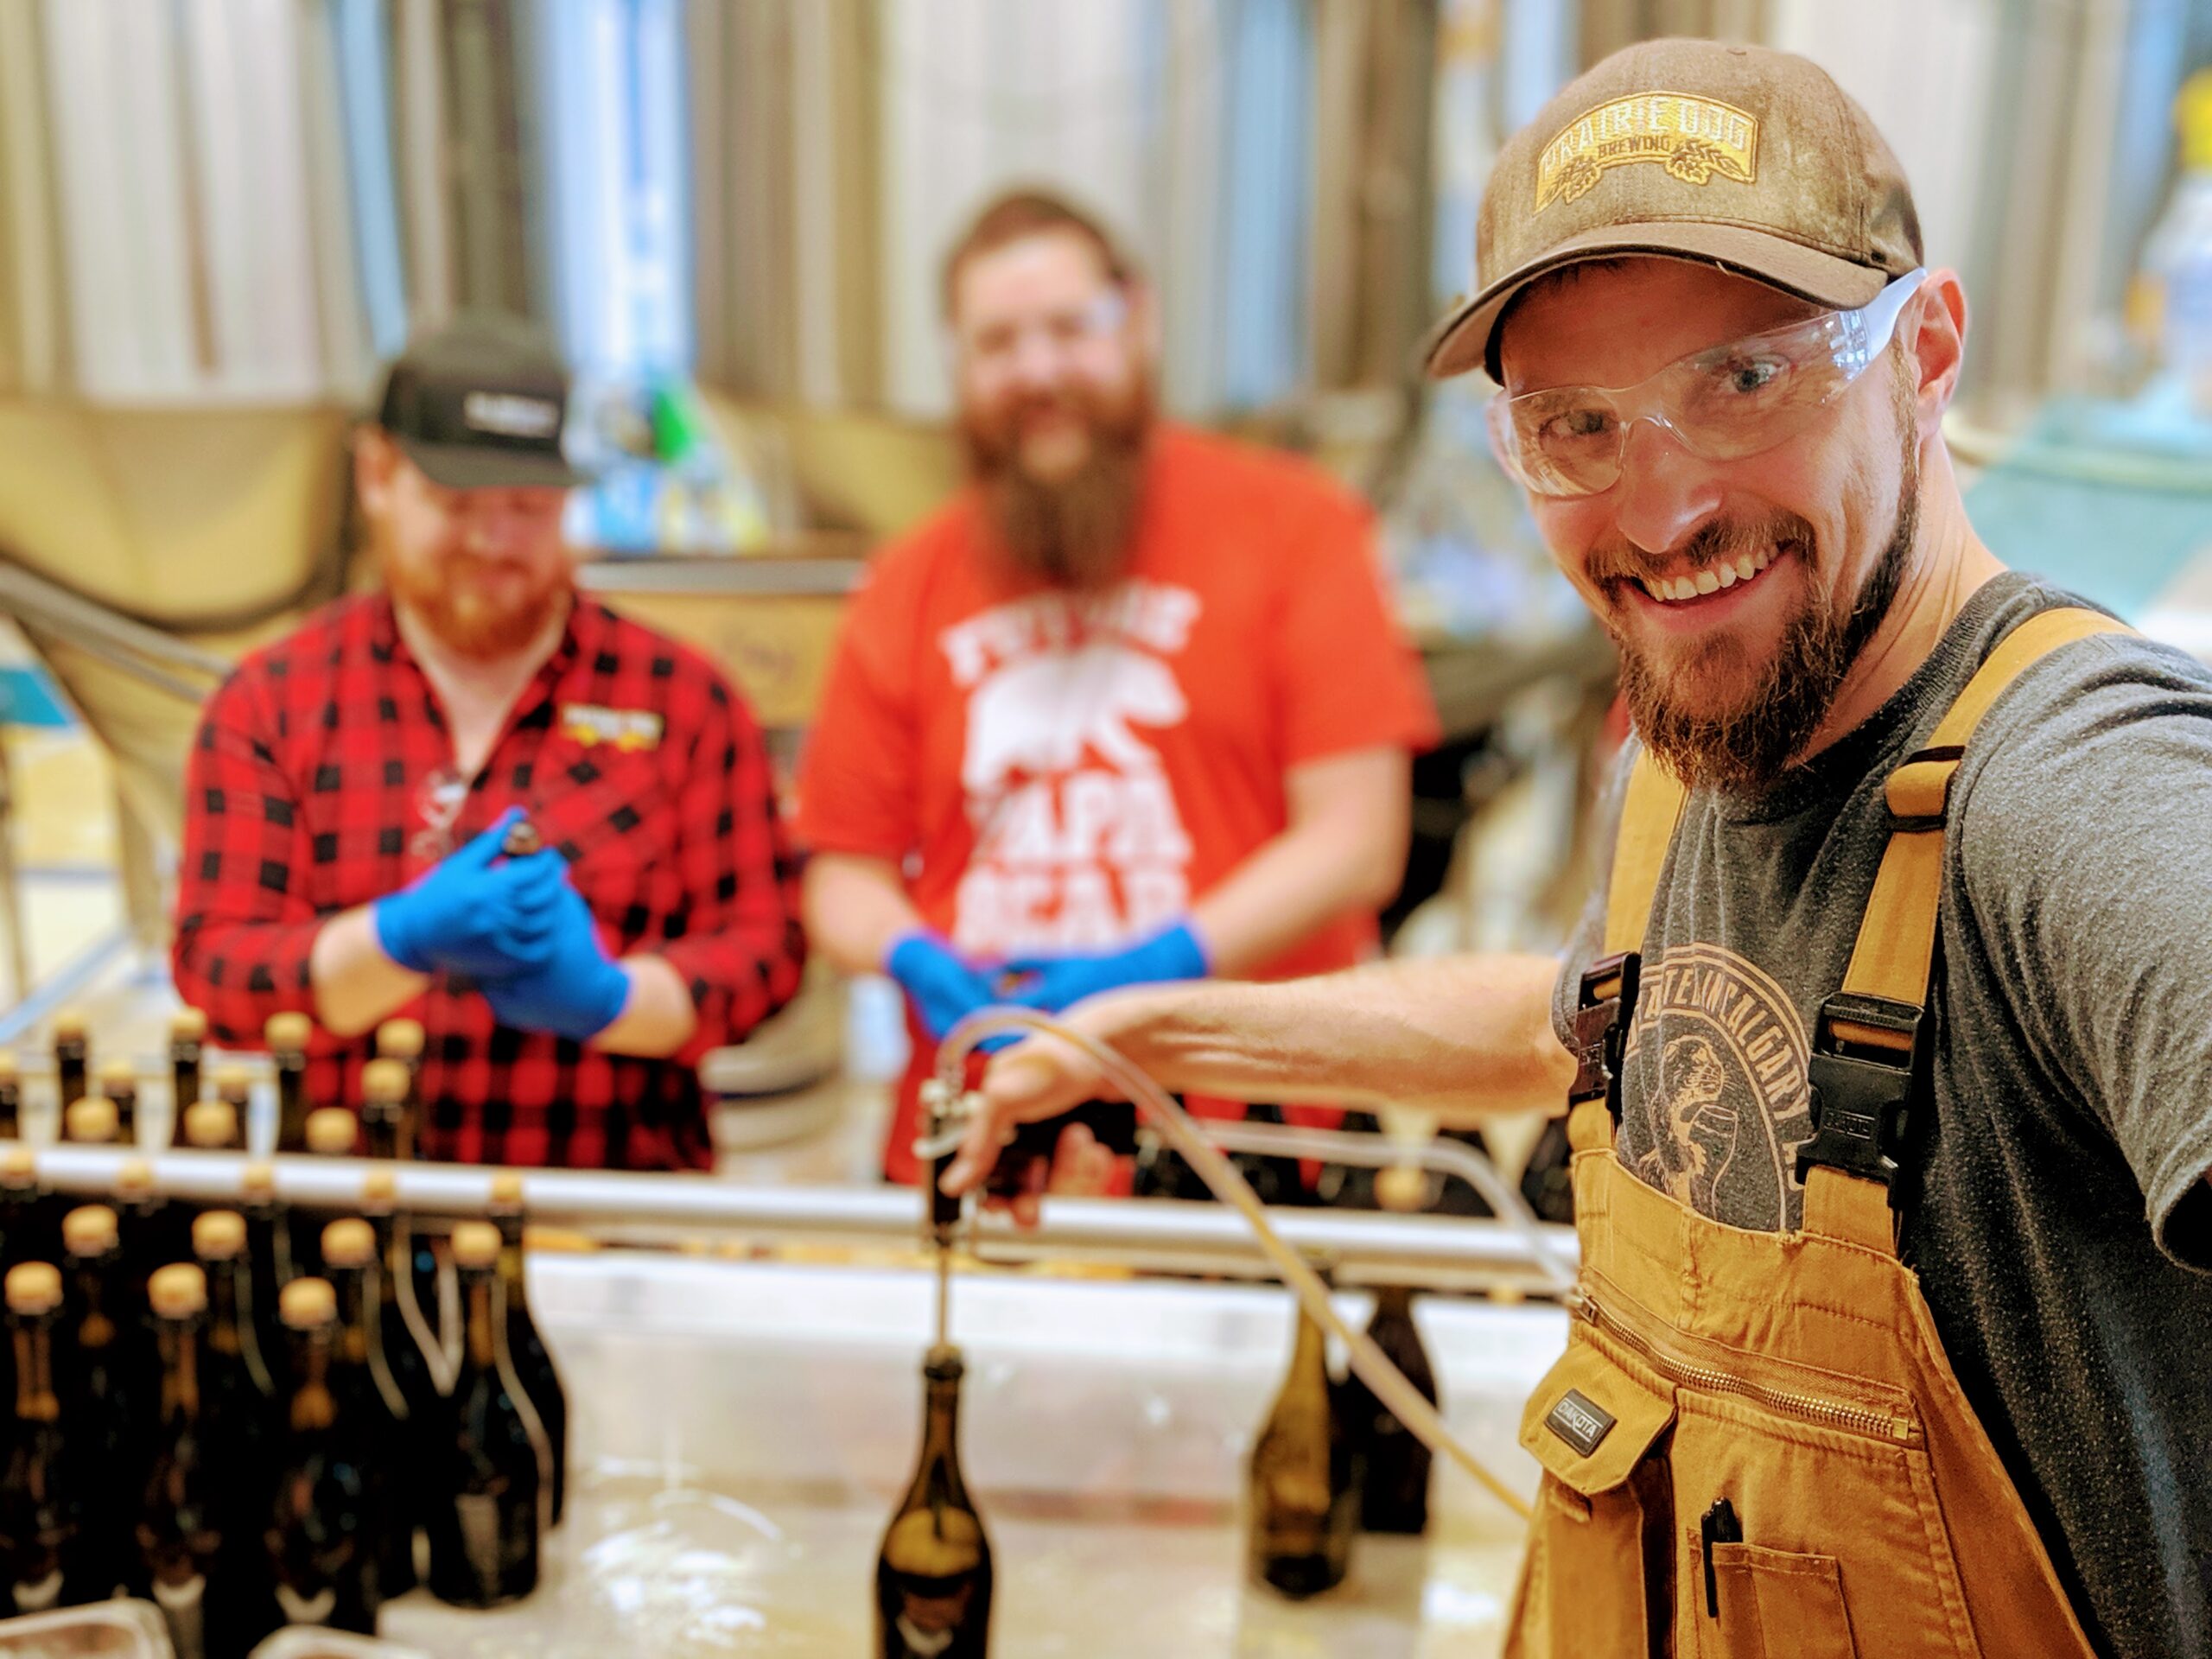 Founder Tyler taking a selfie on the bottling line of Midnight Combine 2019, with helpers in the background.